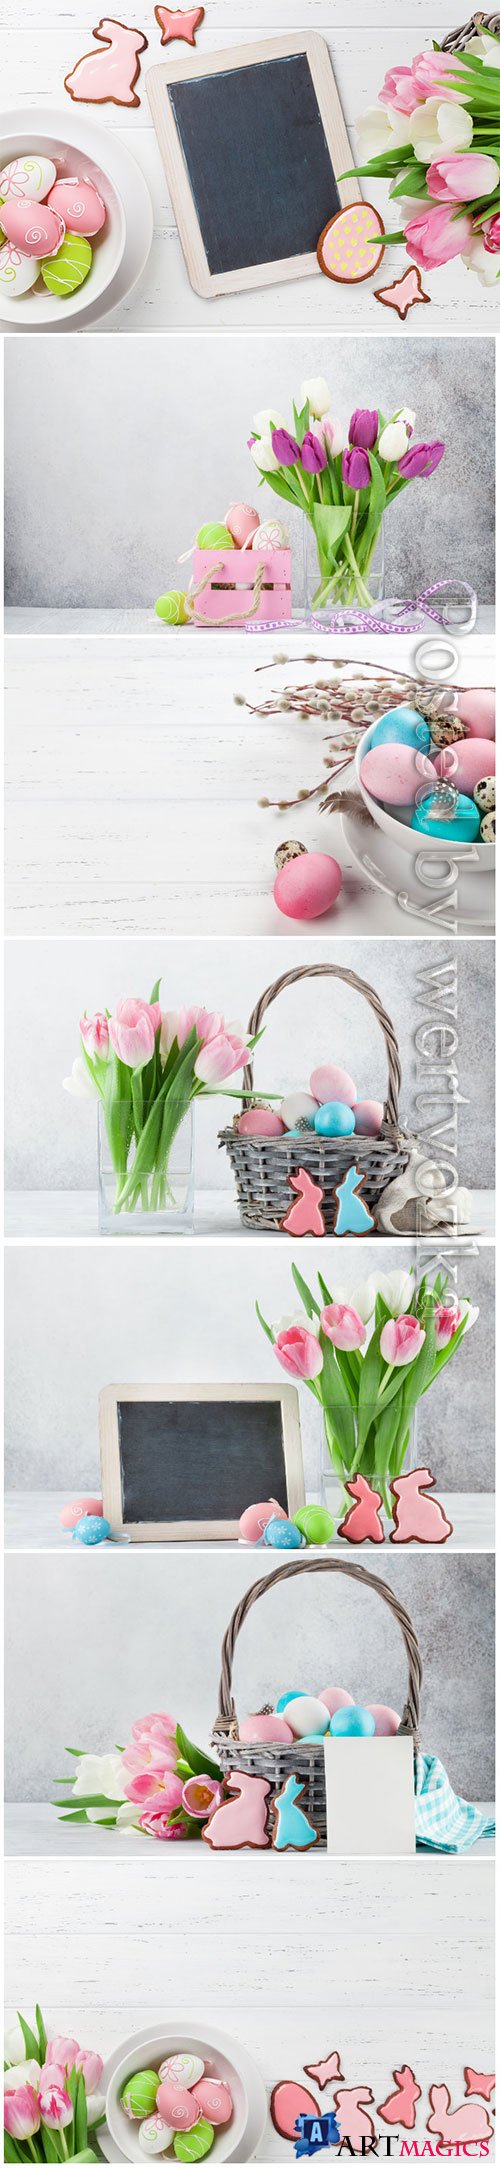 Happy Easter stock photo, Easter eggs, spring flowers